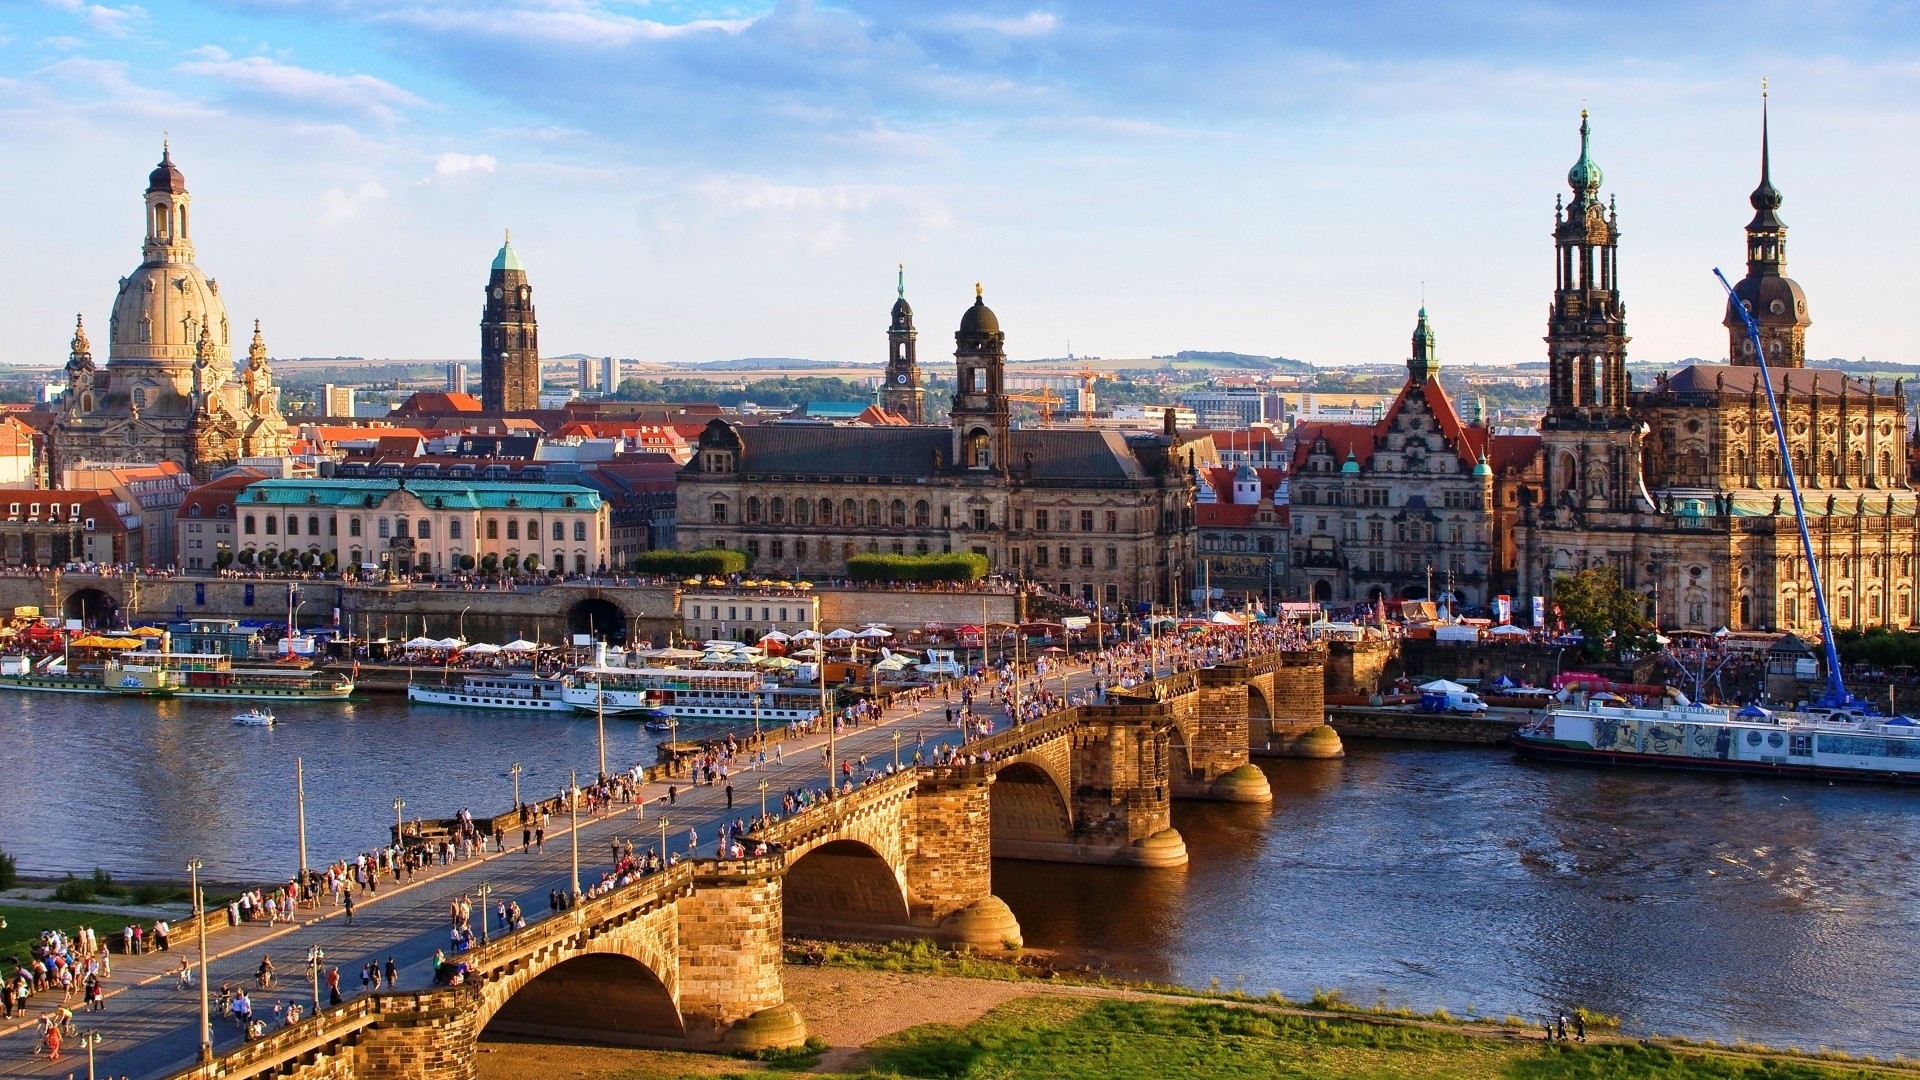 crowds, Architecture, City, Cityscape, Trees, Building, Dresden, Germany, Bridge, Old bridge, Old building, Church, Cathedral, Tower, Ship, Water, River, Clouds Wallpaper